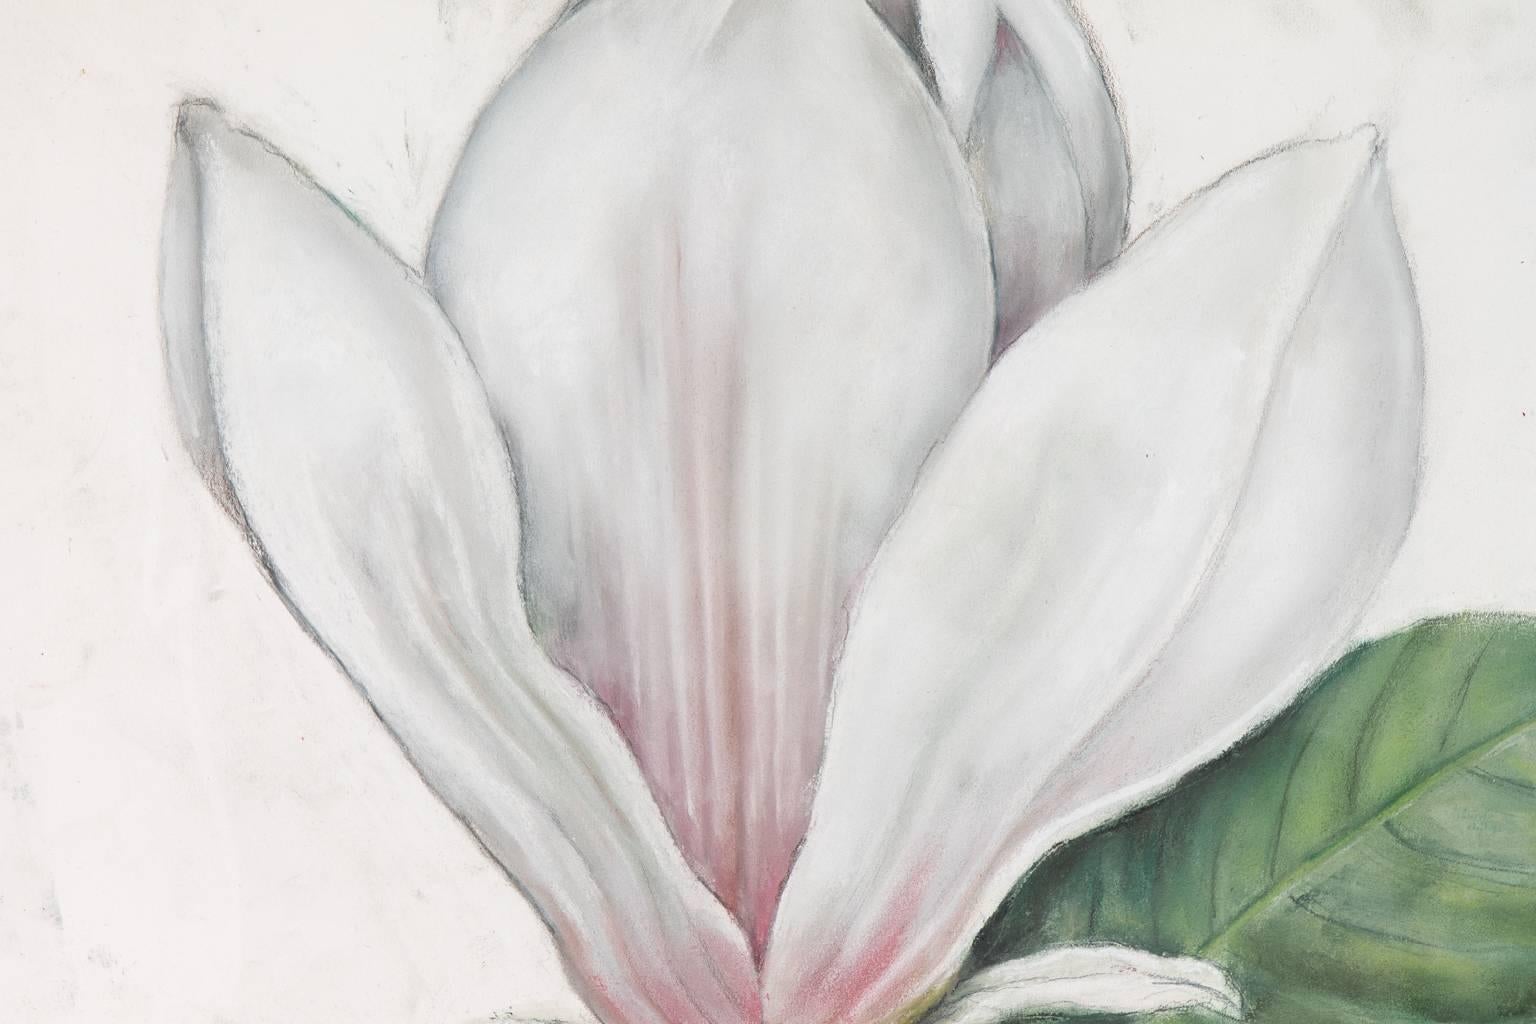 Drawing of a Magnolia flower by contemporary artist: Marianne Stikas. Signed and dated: 2017. Pastel on paper.